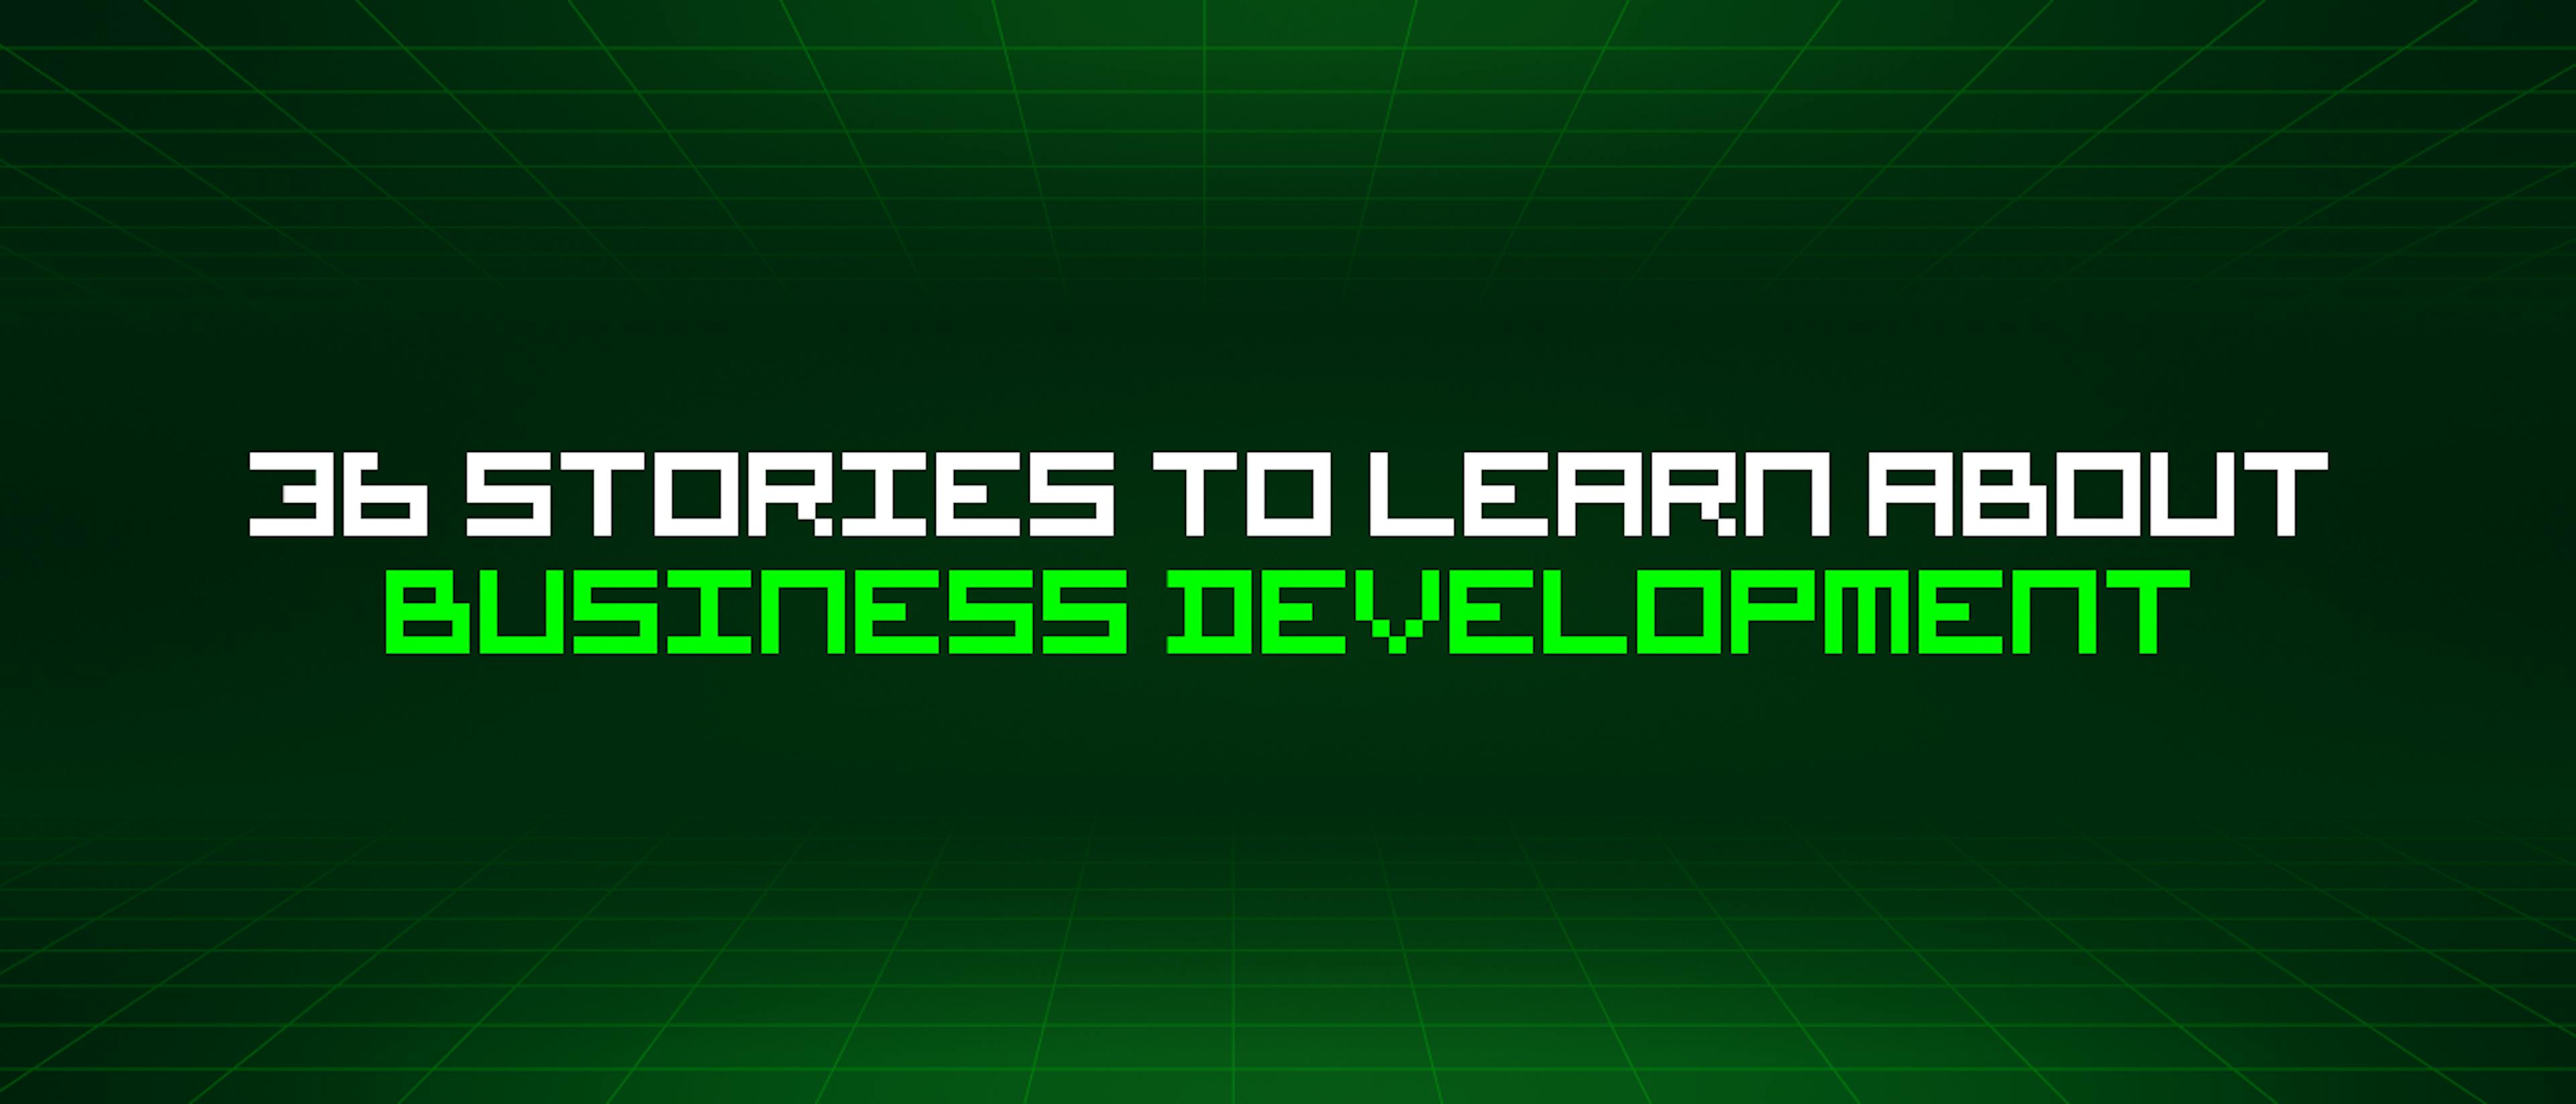 featured image - 36 Stories To Learn About Business Development